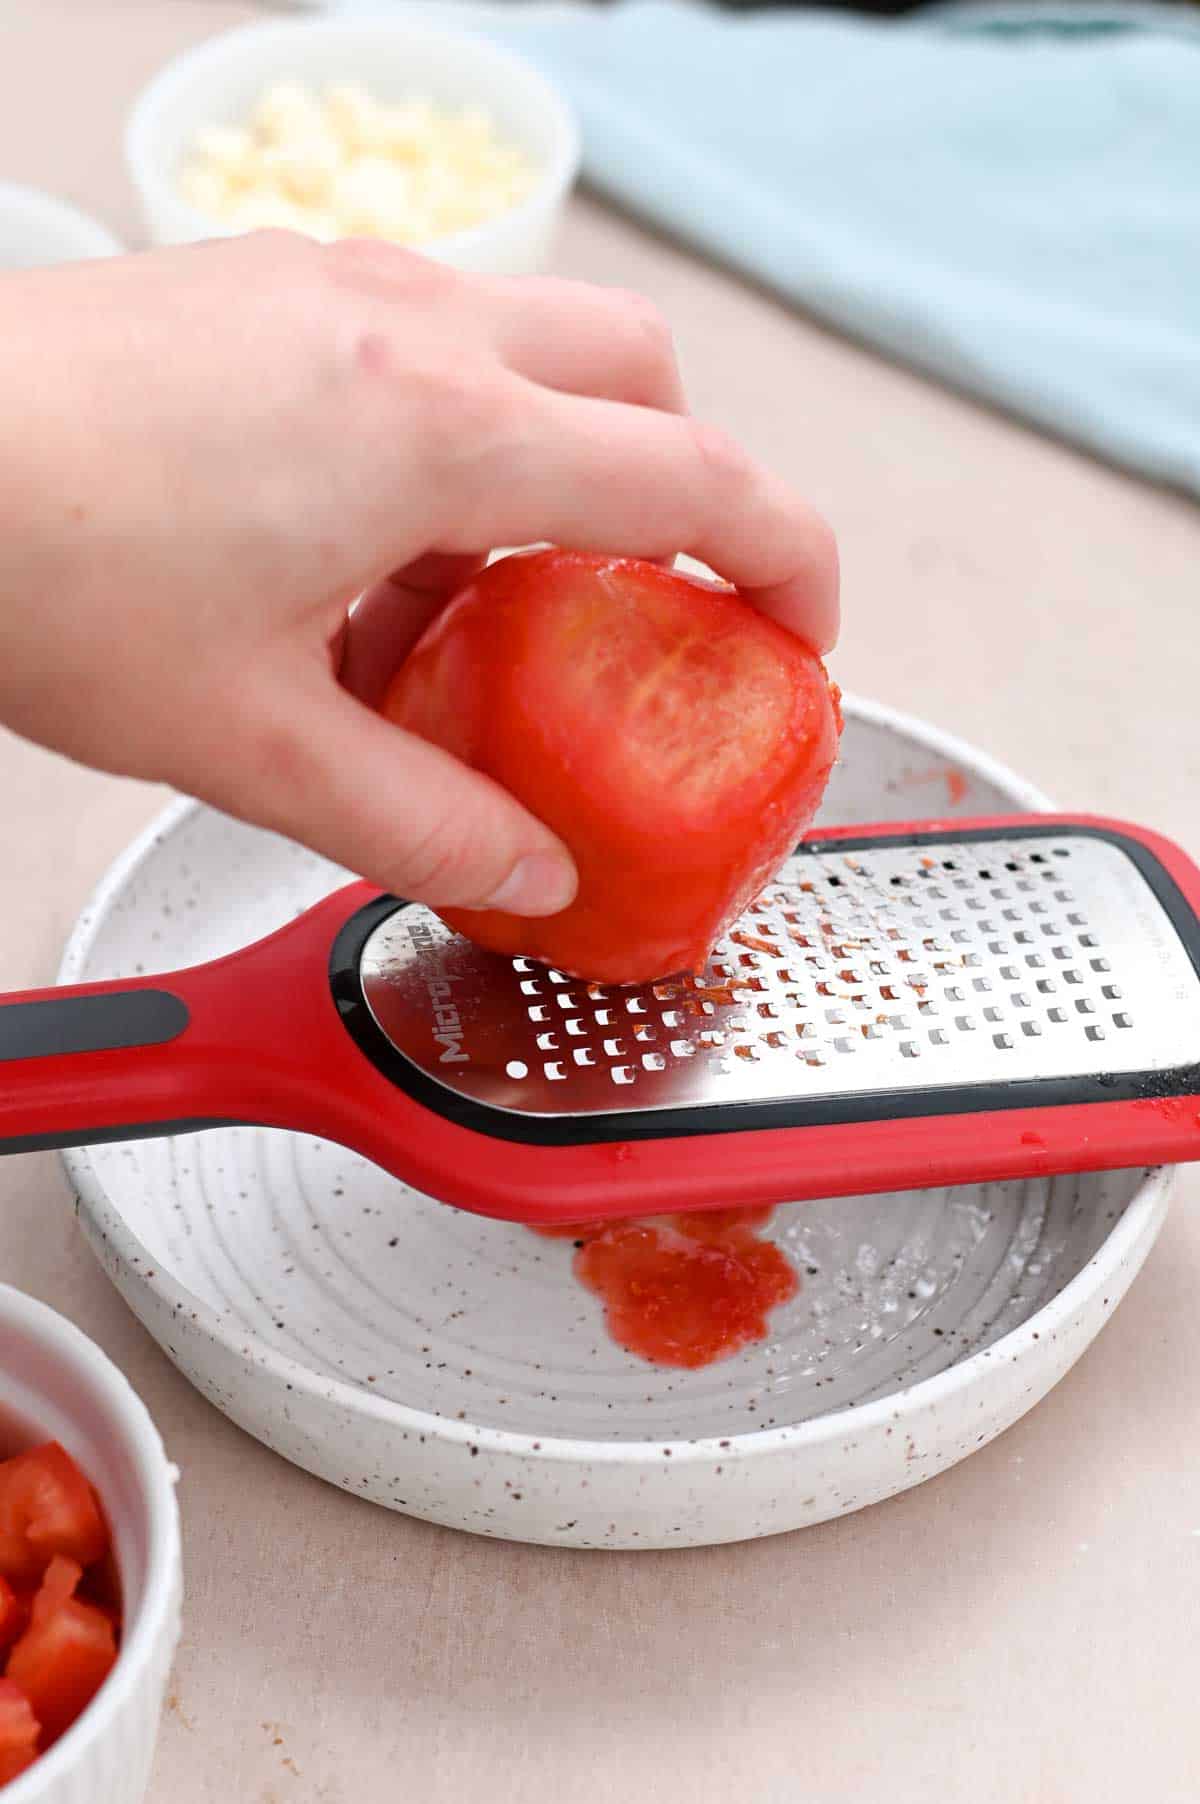 Hand grating a large tomato on a red grater with small holes.